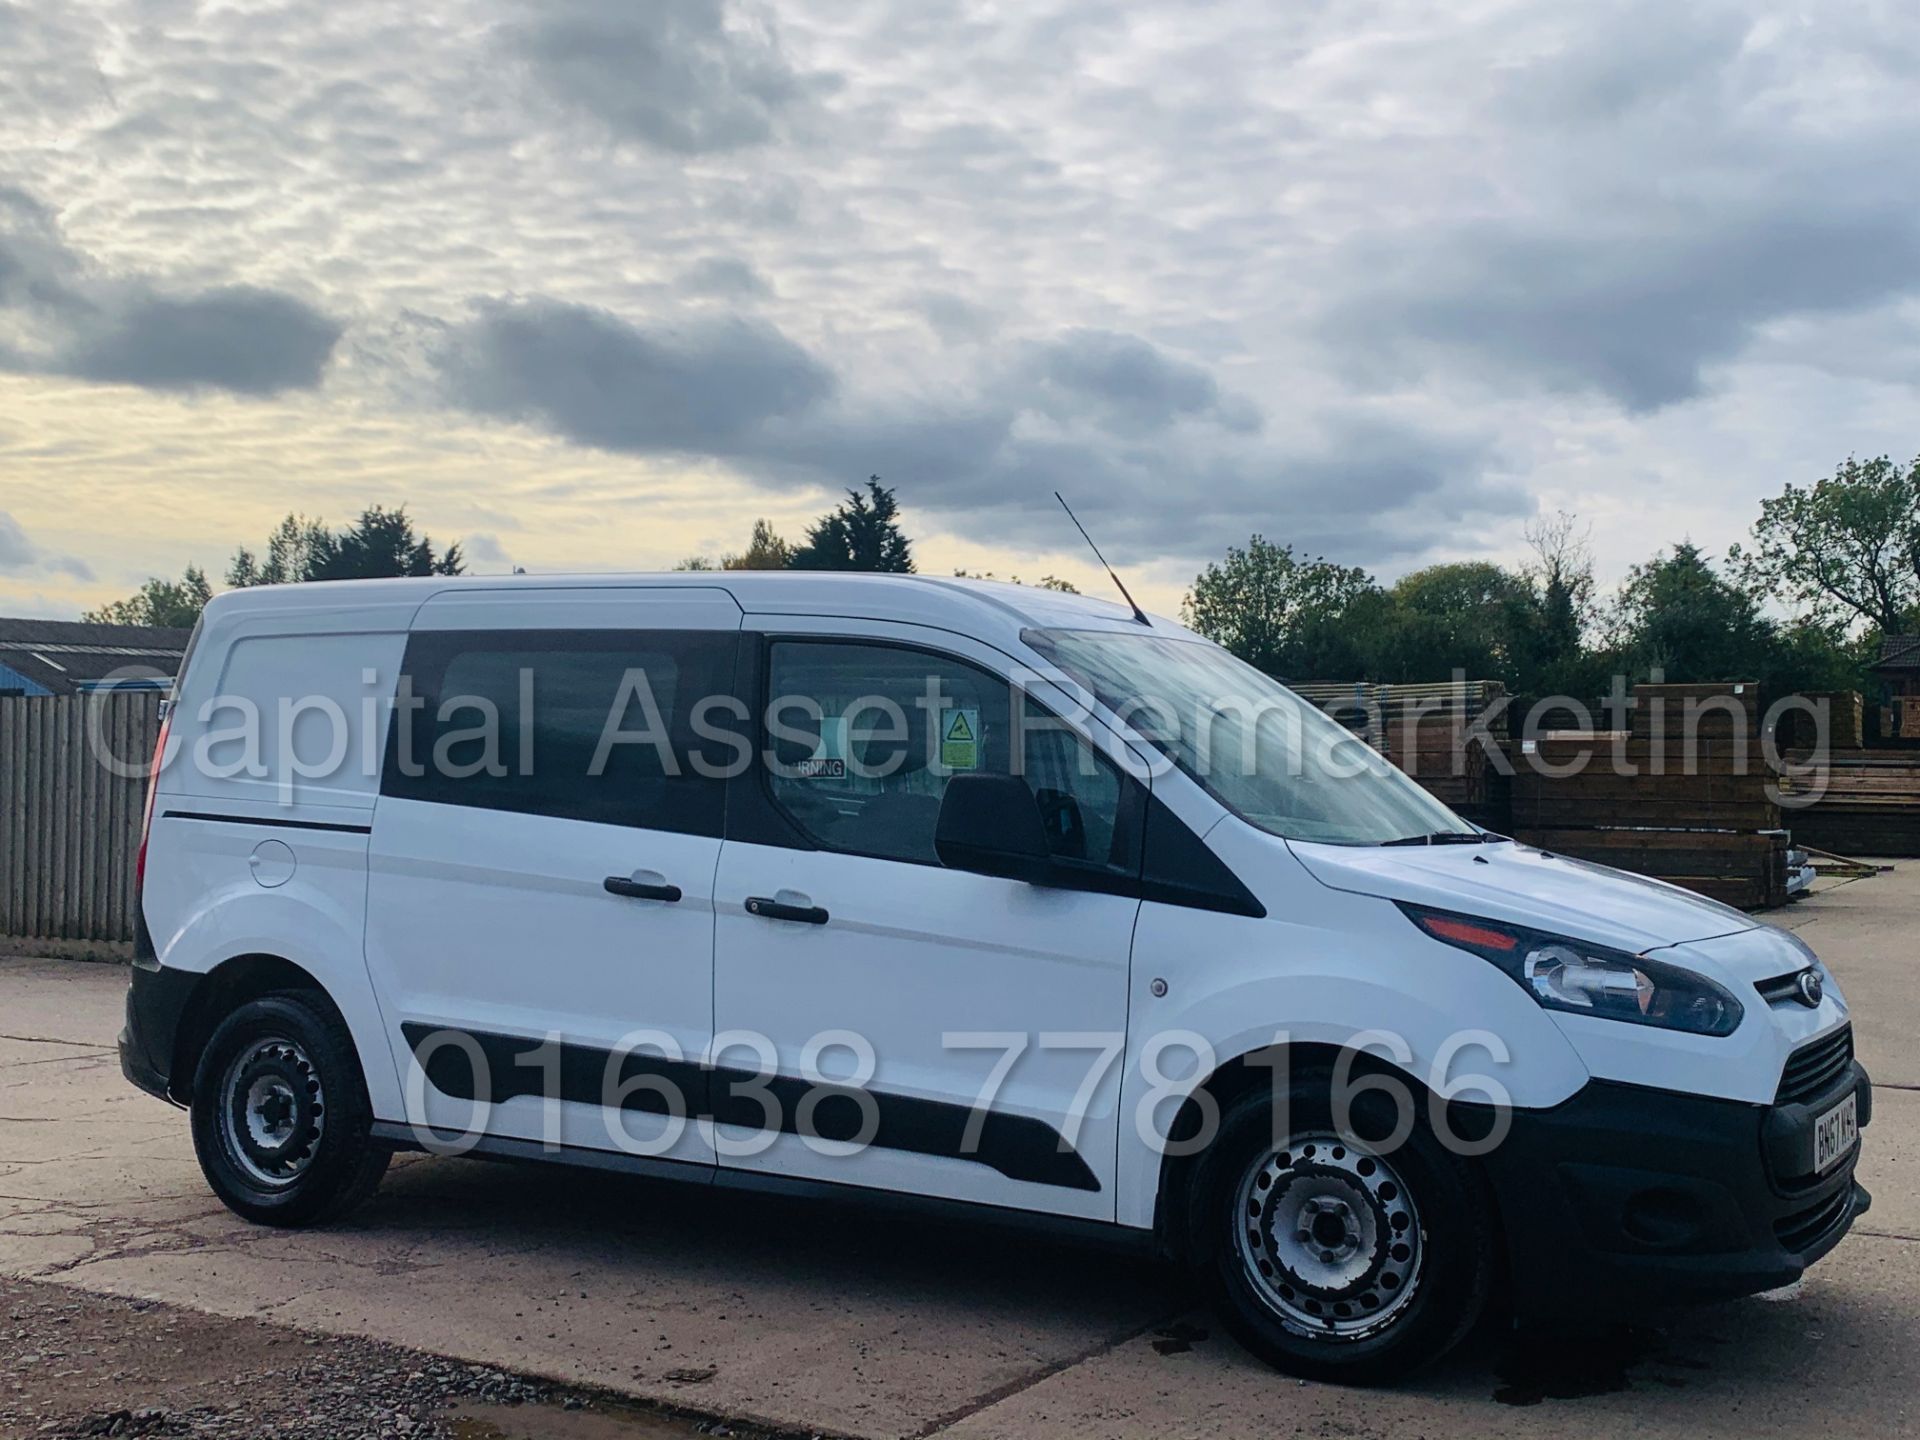 FORD TRANSIT CONNECT *LWB - 5 SEATER CREW VAN* (2018 - EURO 6) 1.5 TDCI *AIR CON* (1 OWNER) - Image 11 of 40